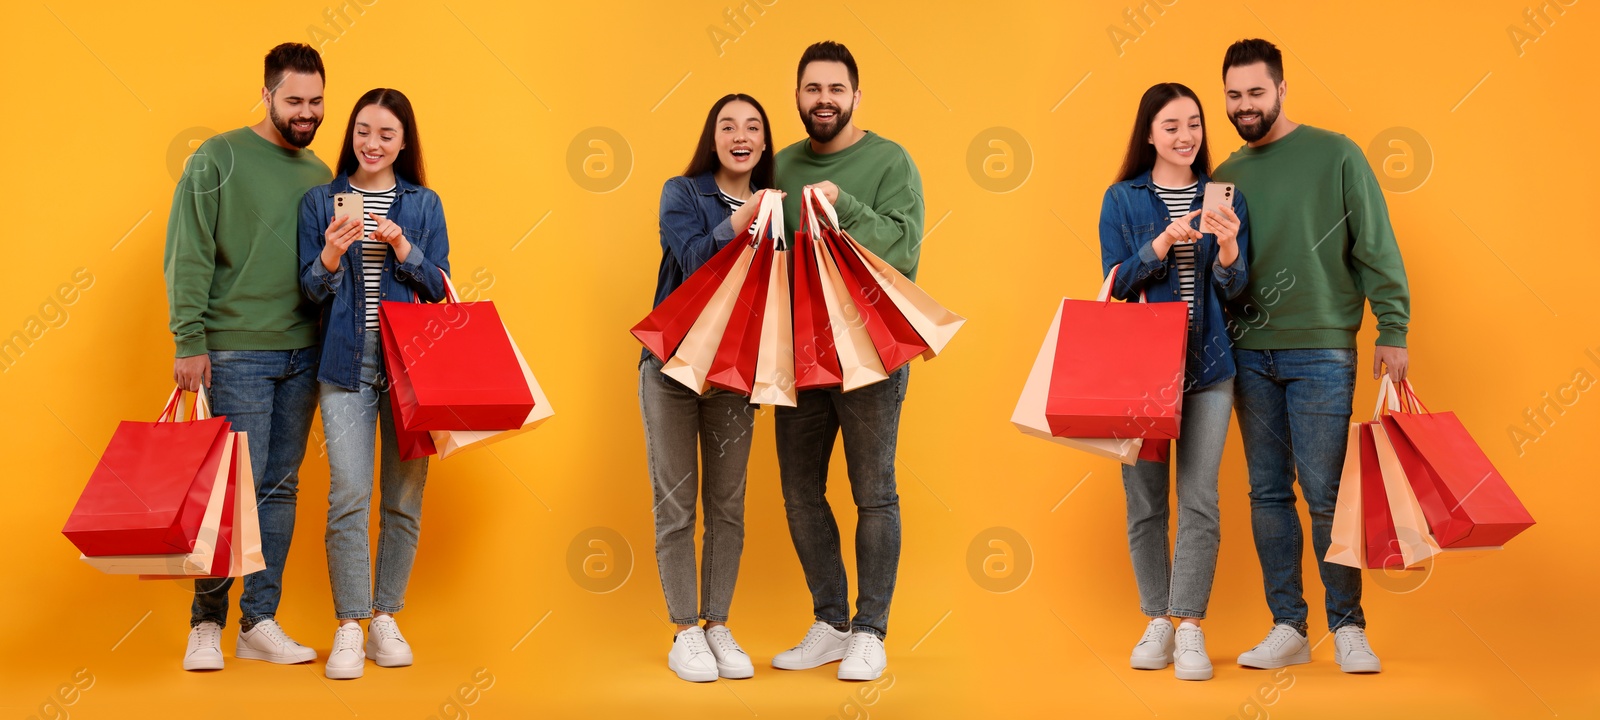 Image of Happy couple with shopping bags on orange background, set with photos